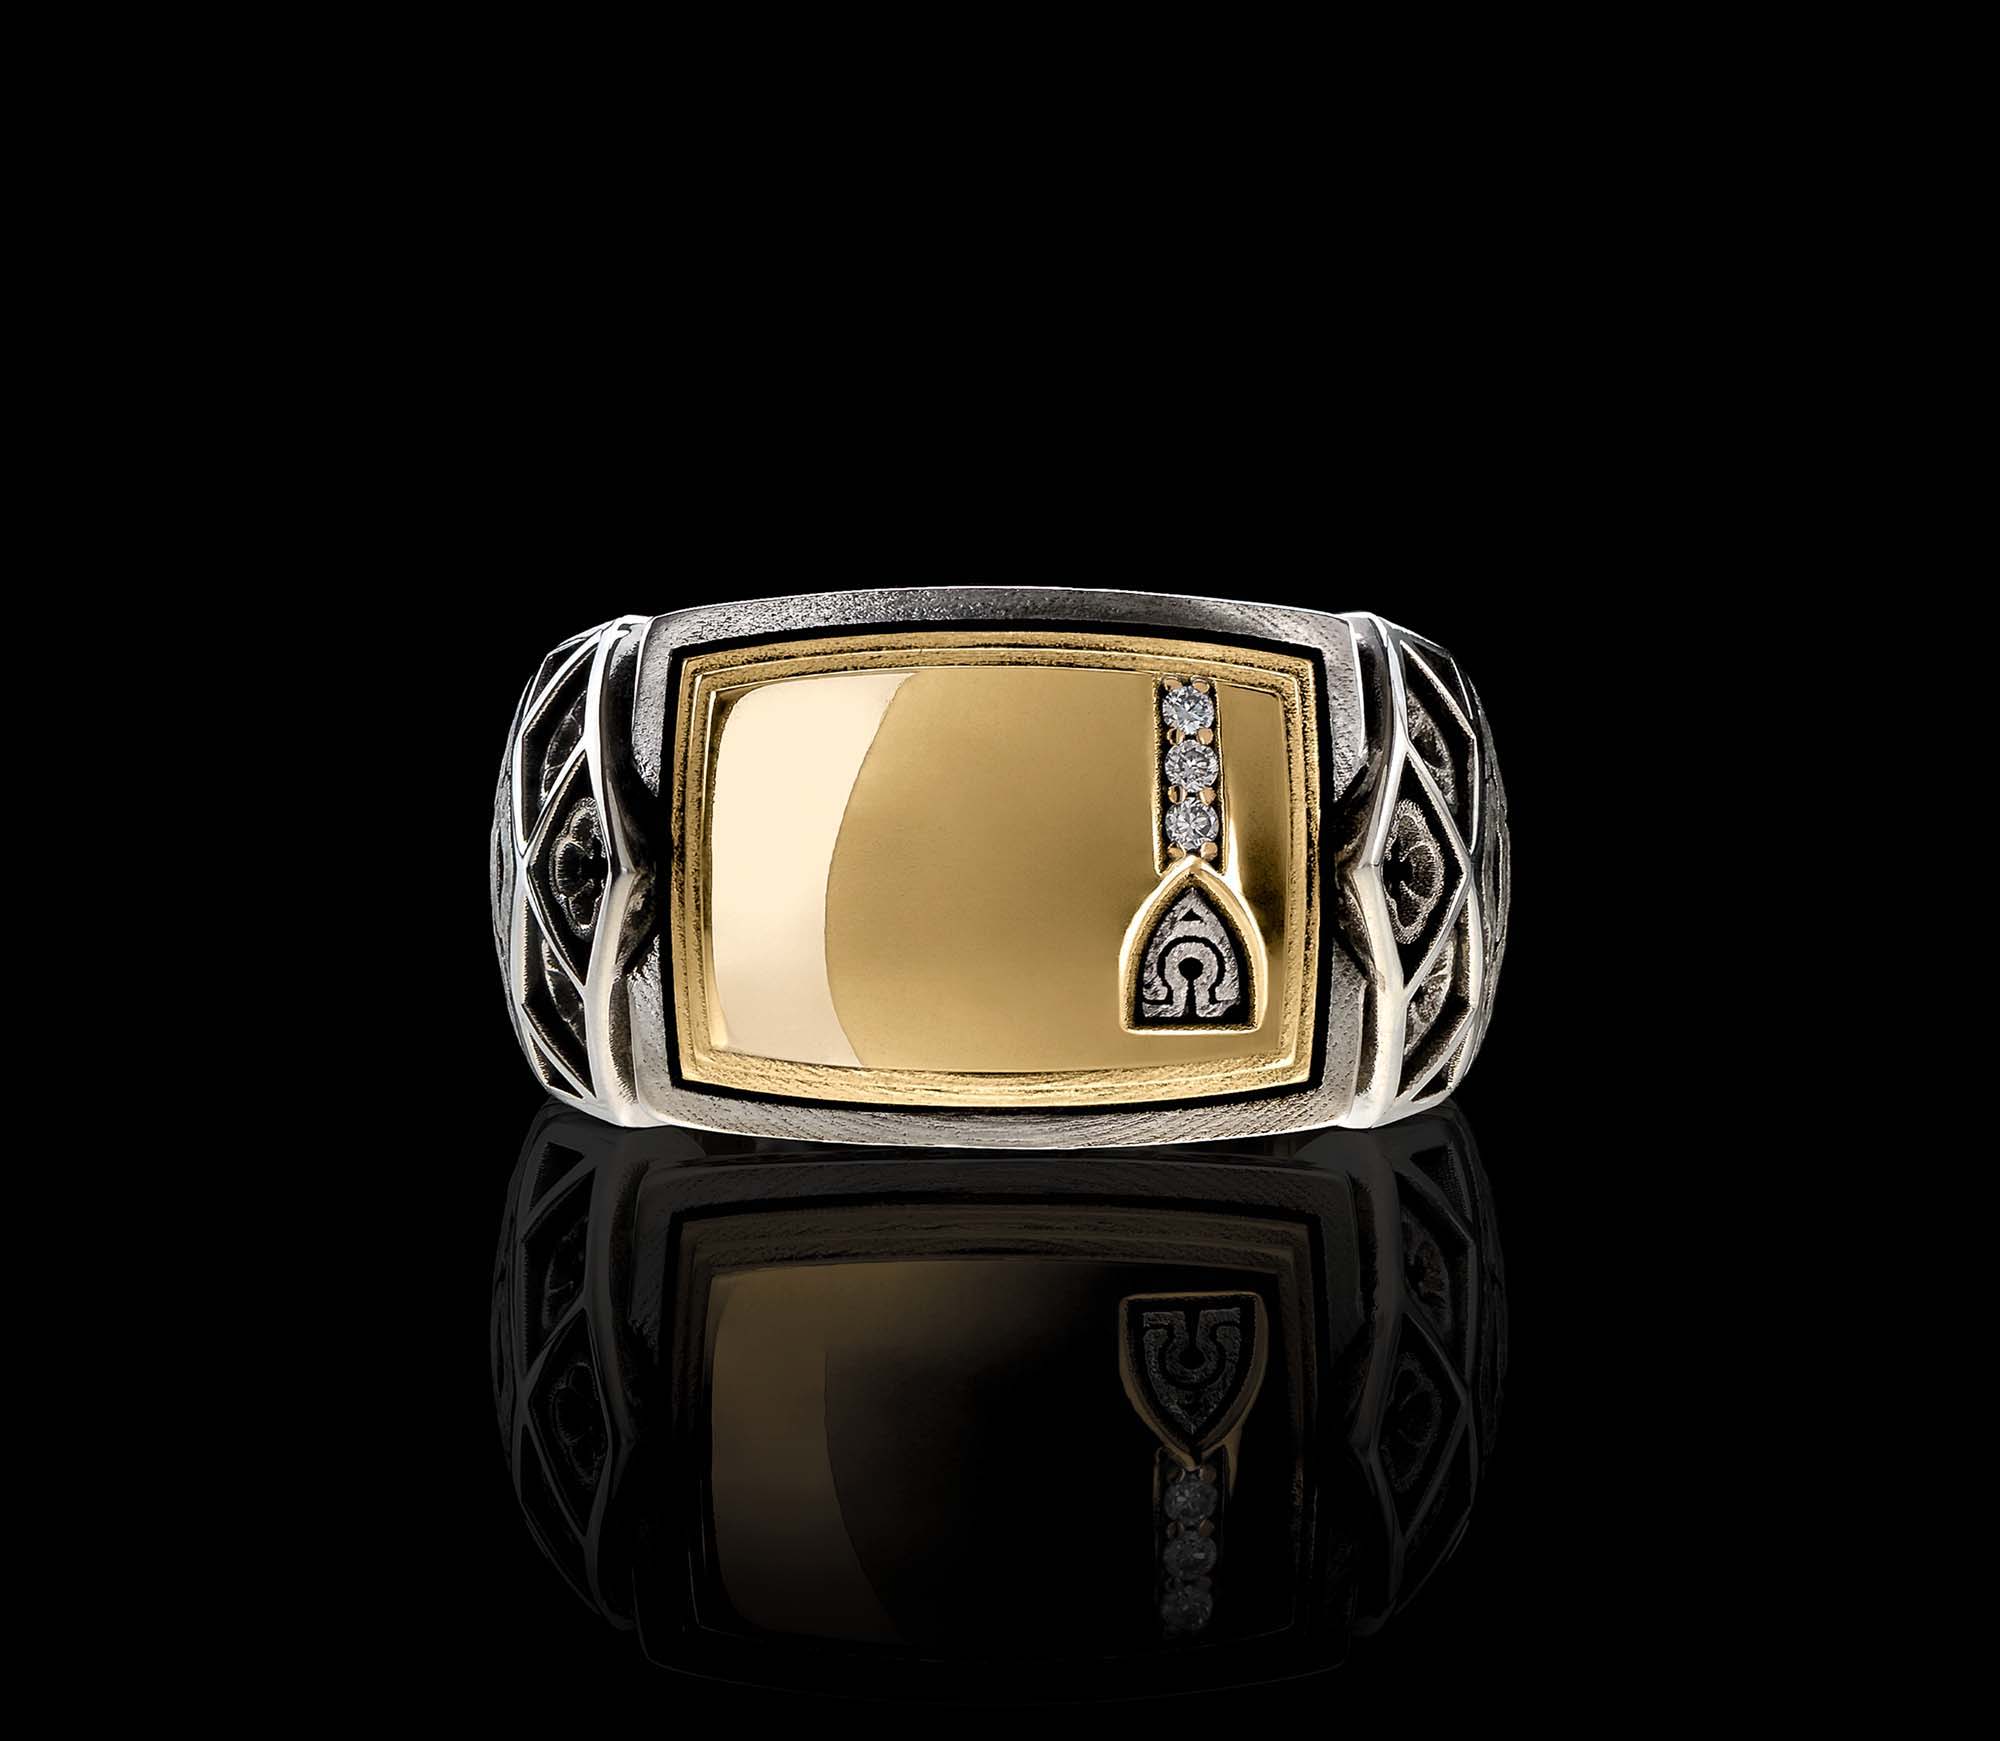 Conviction Band Luxe Edition Ring in 14K Yellow Gold, 925 Sterling Silver, & Diamonds